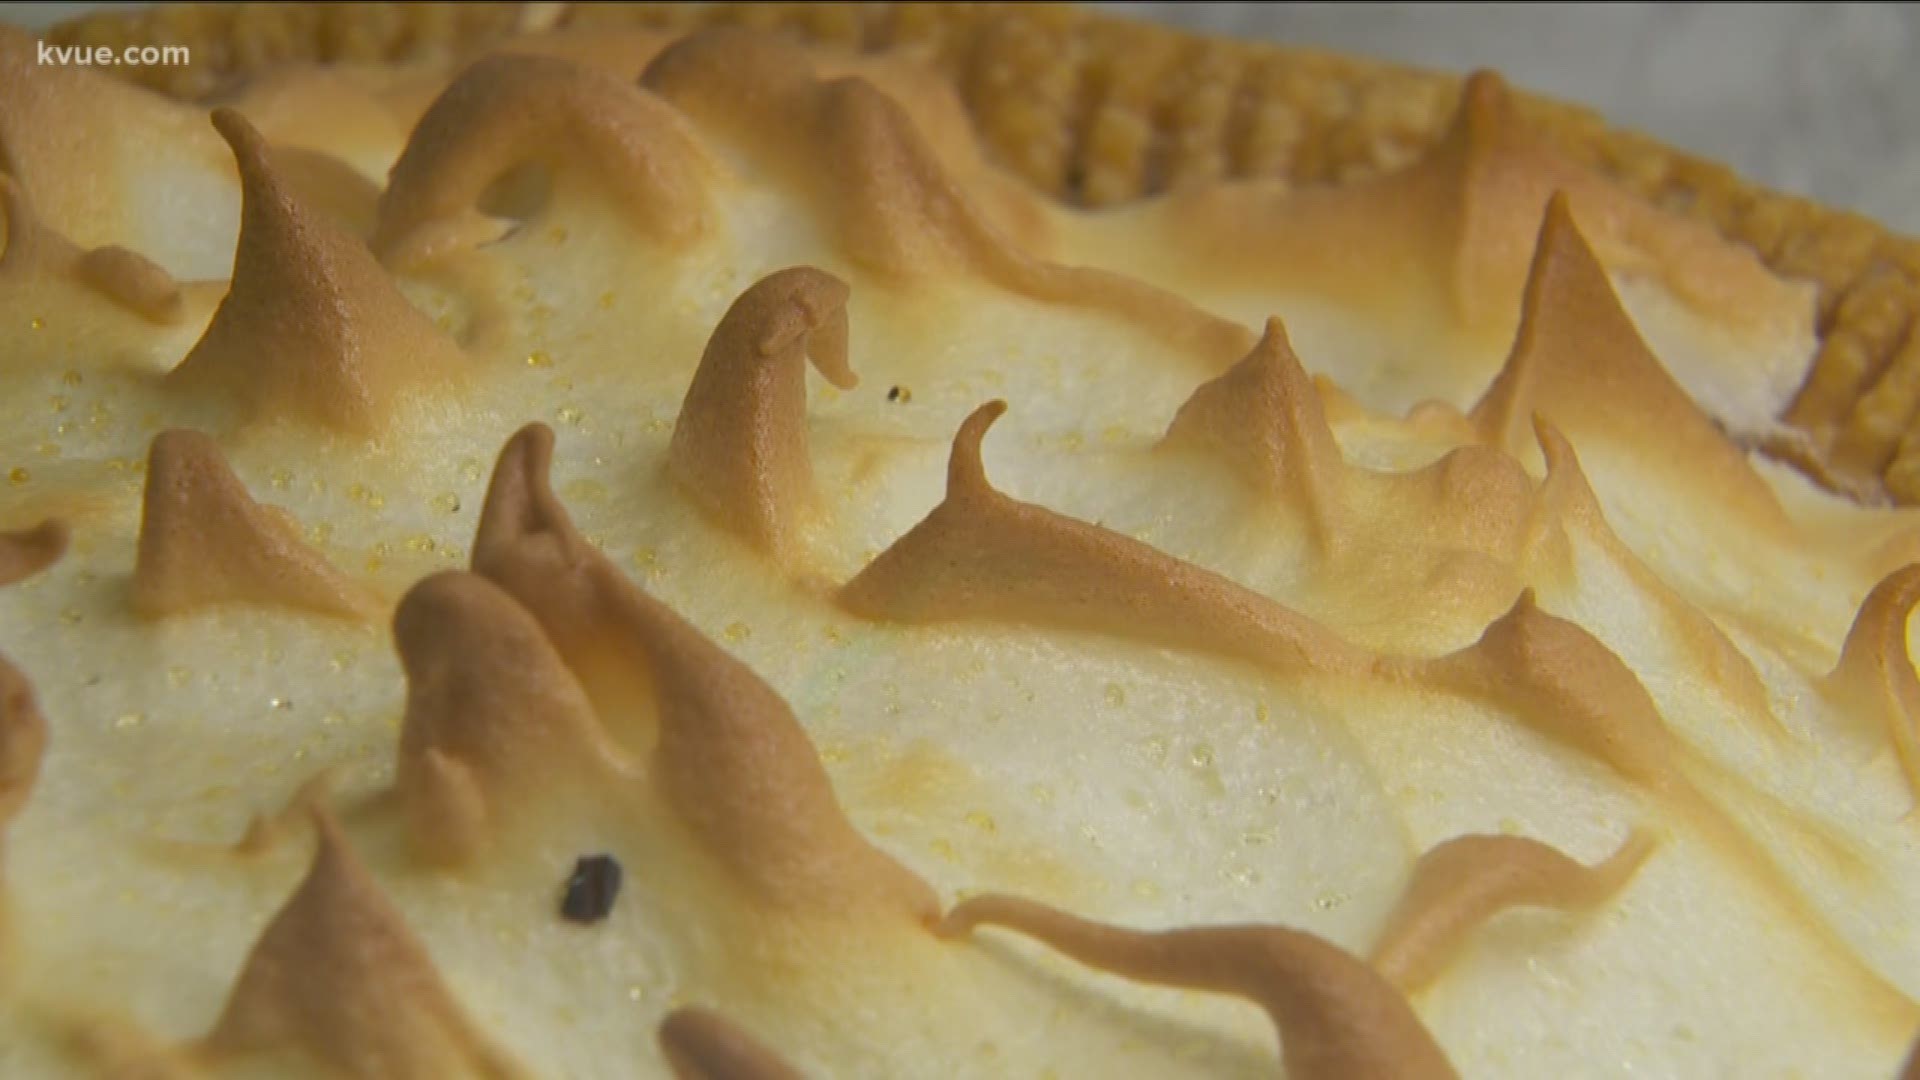 For this Foodie Friday, we're going to Round Rock to see delicious pies and Bolivian-inspired empanadas.